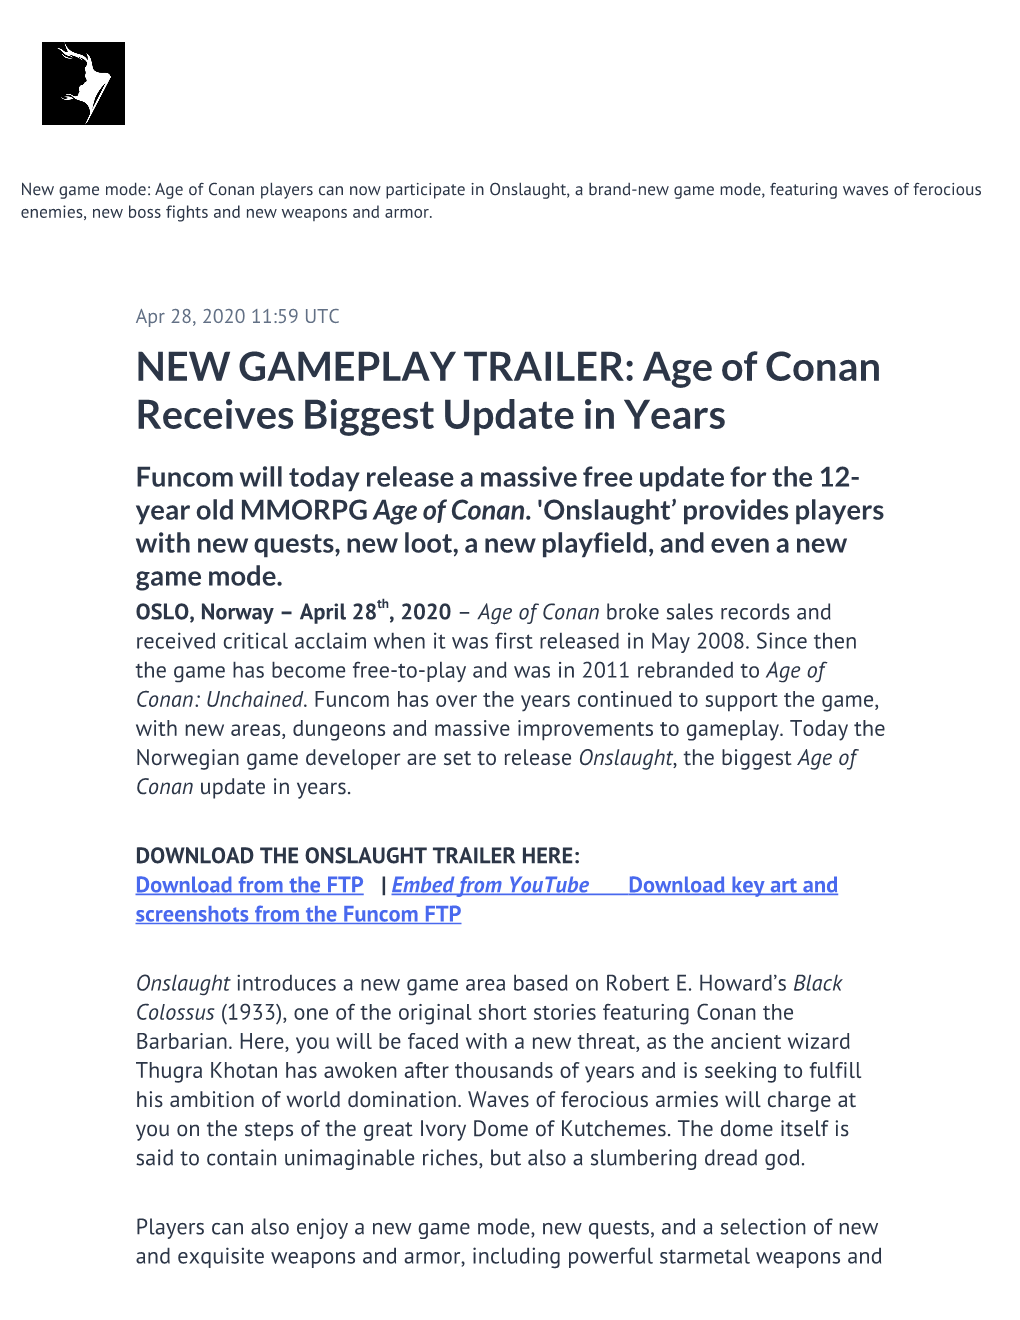 NEW GAMEPLAY TRAILER: Age of Conan Receives Biggest Update in Years